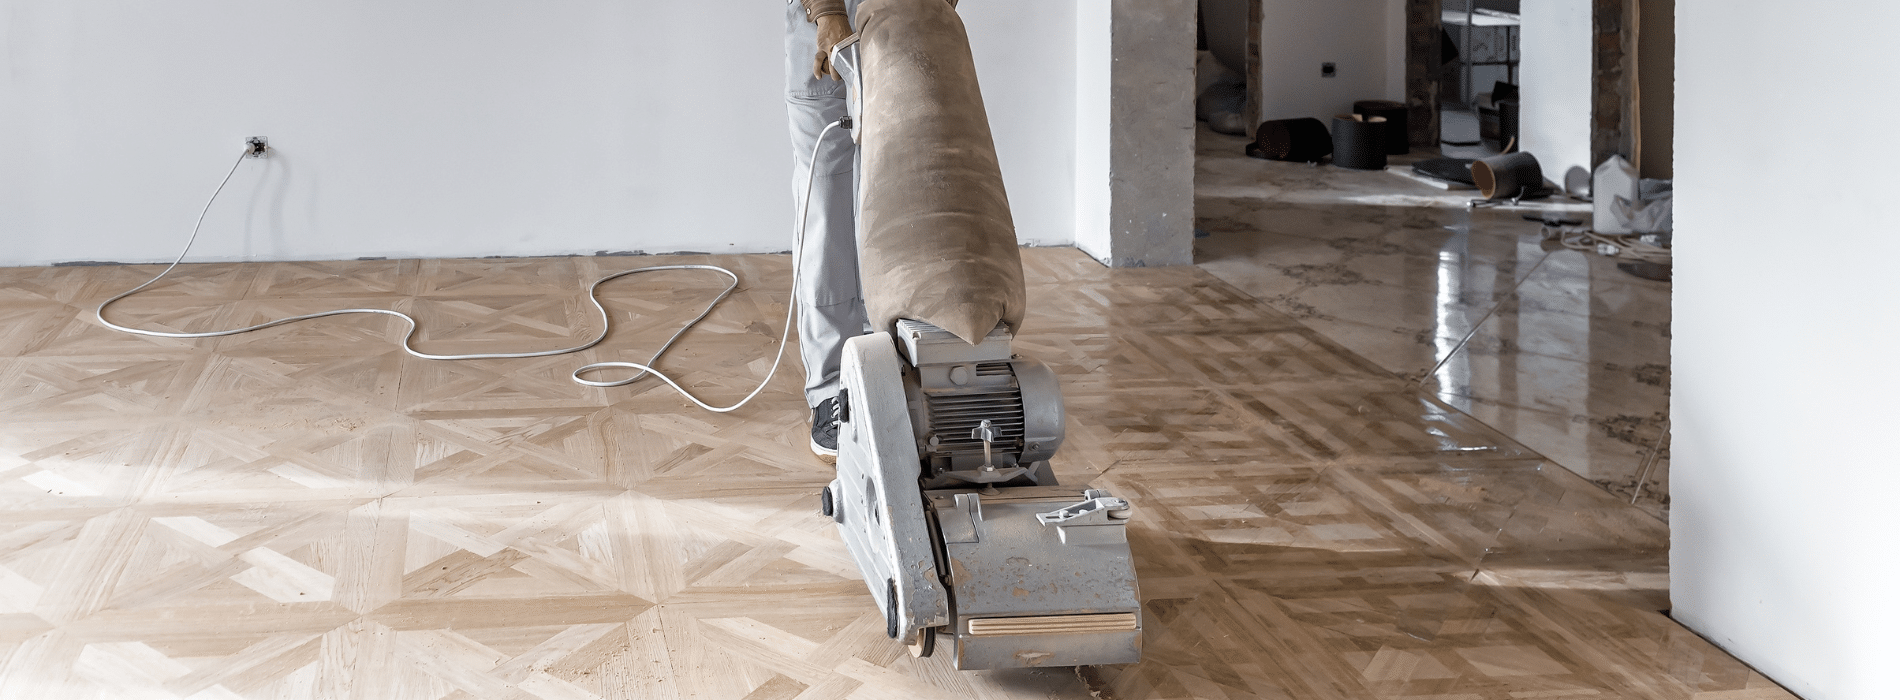 In South Kensington, SW7, Mr Sander® are using a Bona Scorpion drum sander, with a dimension of 200 mm and an effect of 1.5 kW. The sander operates on a voltage of 240 V and a frequency of 50 Hz. It is connected to a dust extraction system with a HEPA filter for a clean and efficient sanding process.